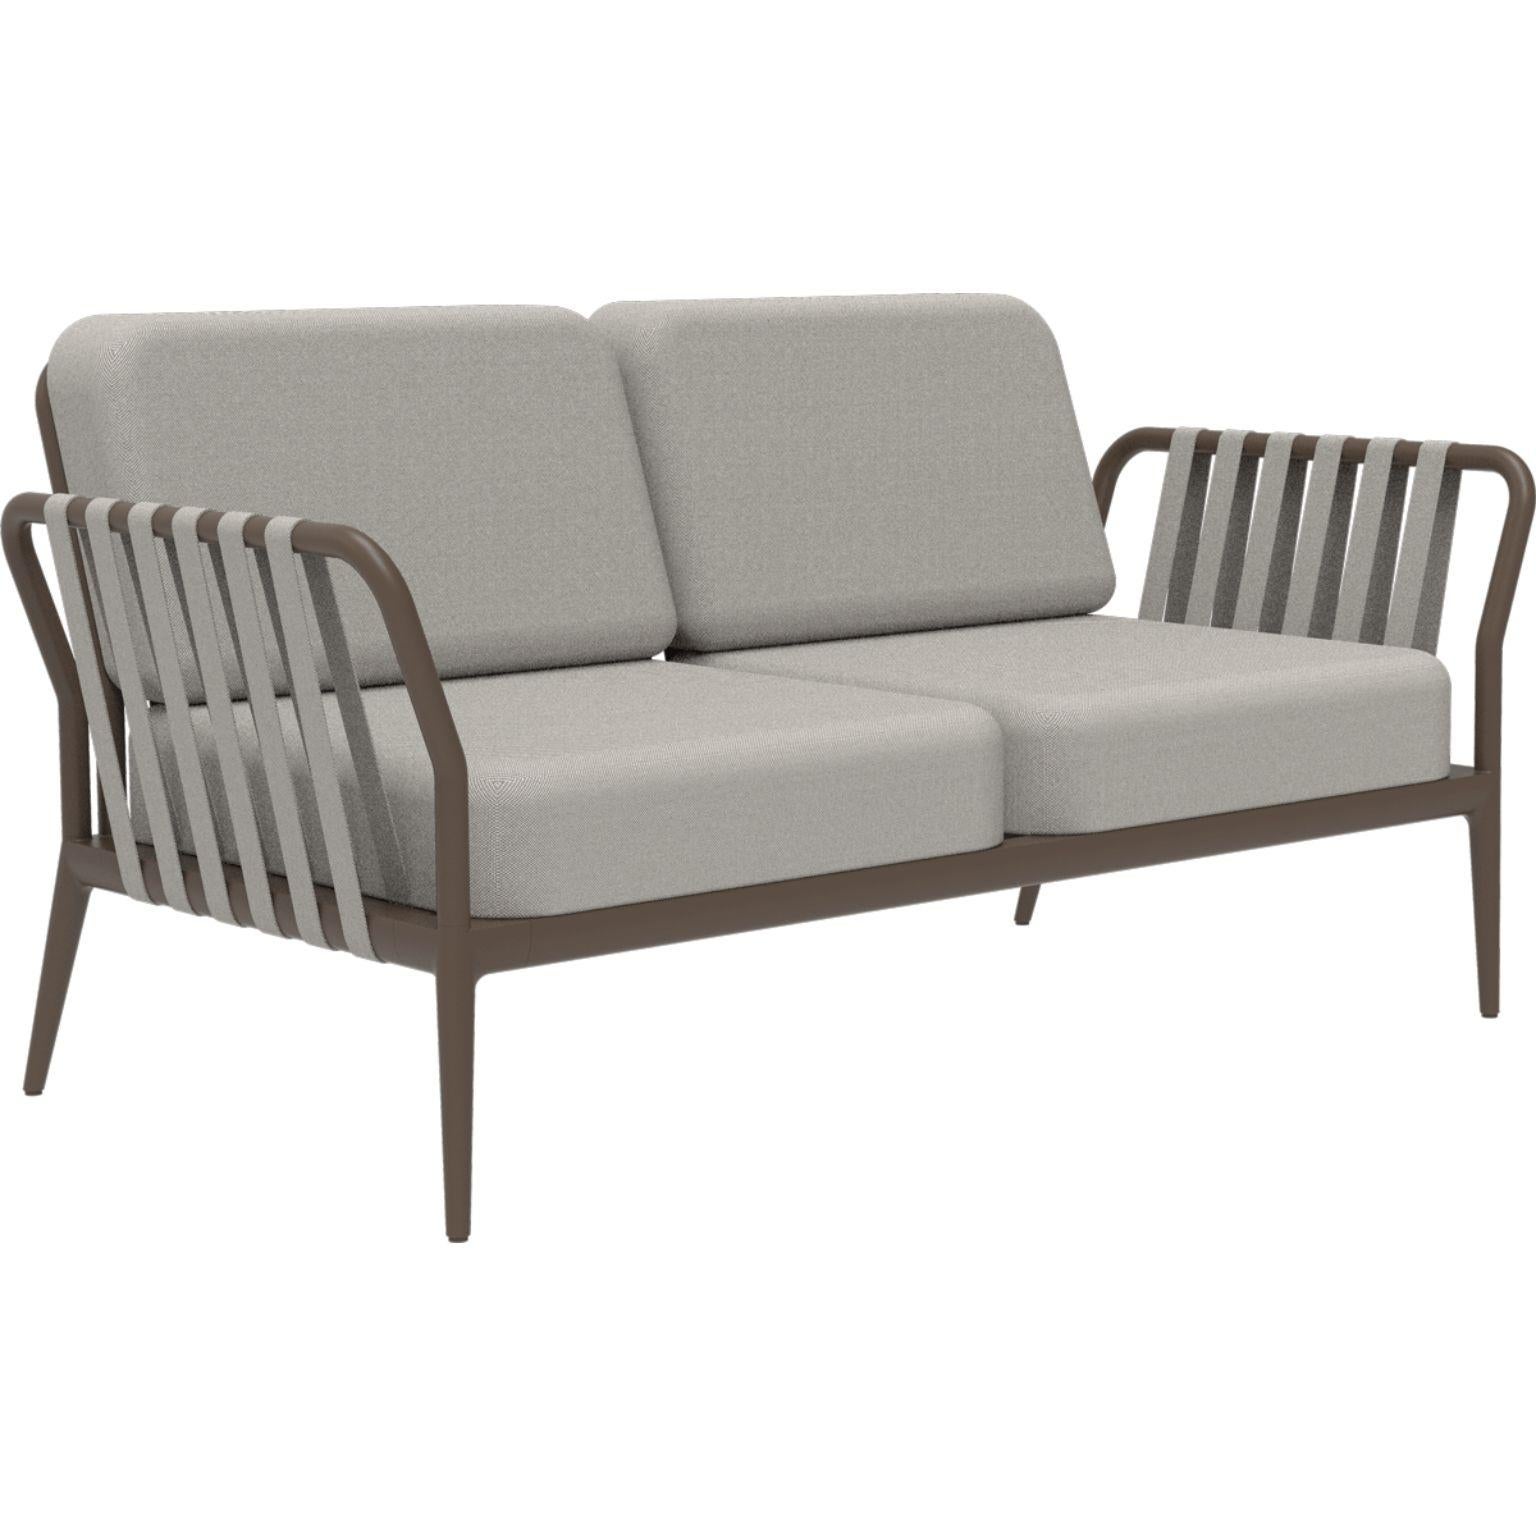 Ribbons bronze sofa by Mowee.
Dimensions: D83 x W160 x H81 cm
Material: Aluminium, upholstery.
Weight: 32 kg
Also available in different colors and finishes. 

An unmistakable collection for its beauty and robustness. A tribute to the